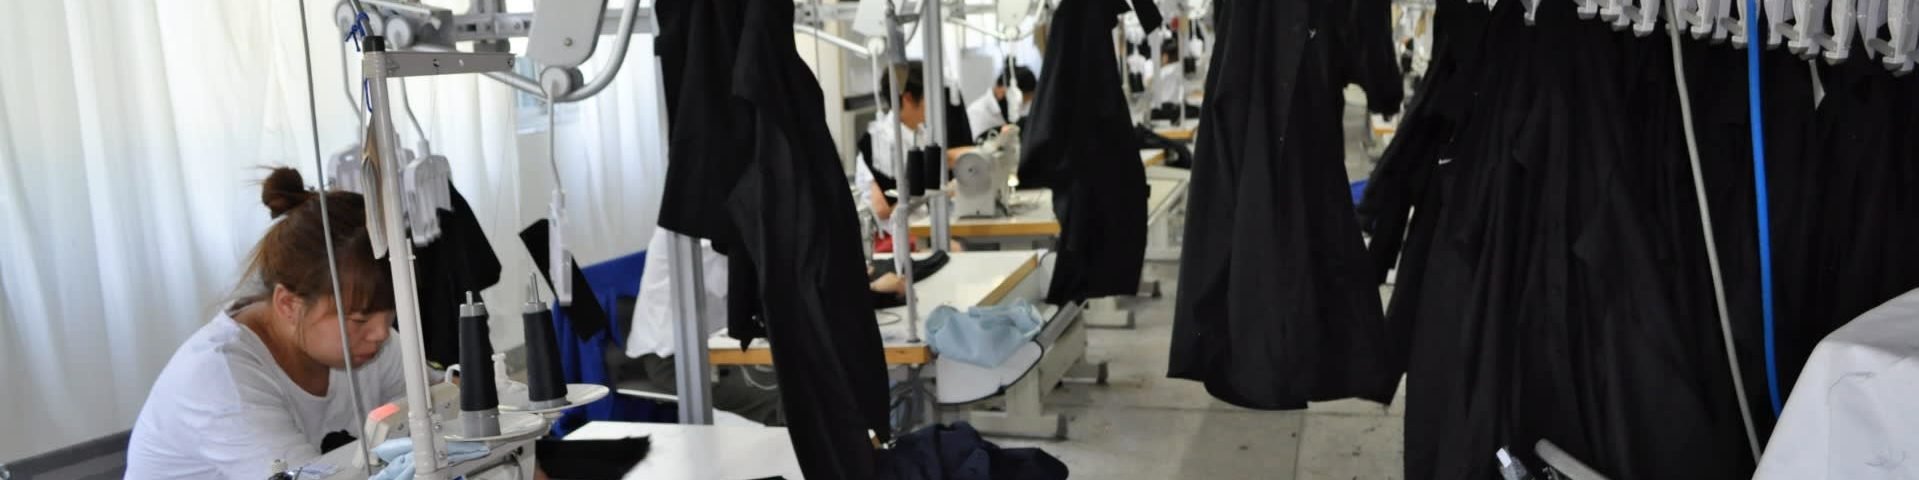 clothing-manufacturers-overseas